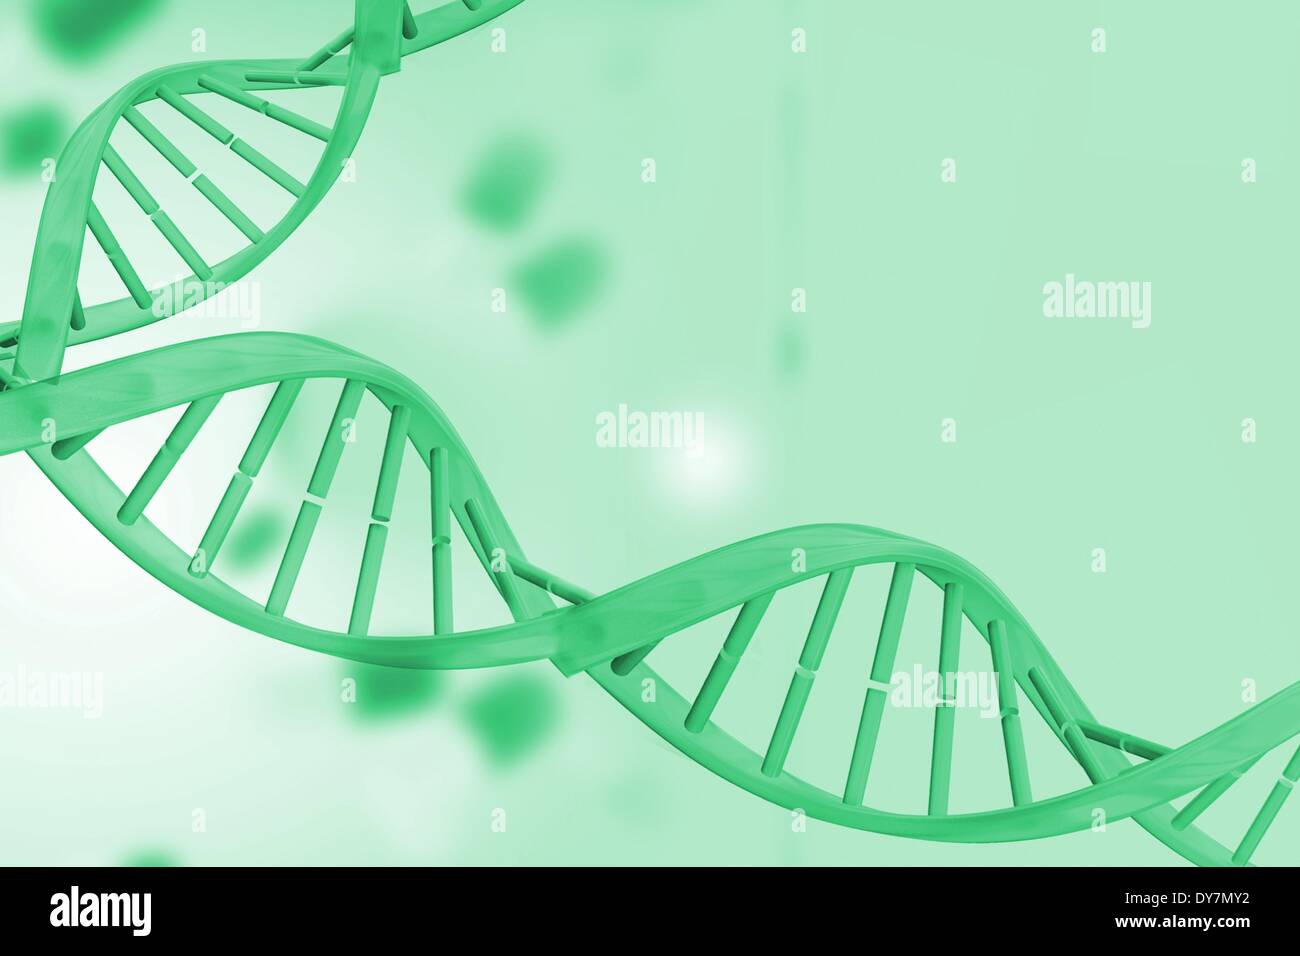 Medical background with green dna helix Stock Photo